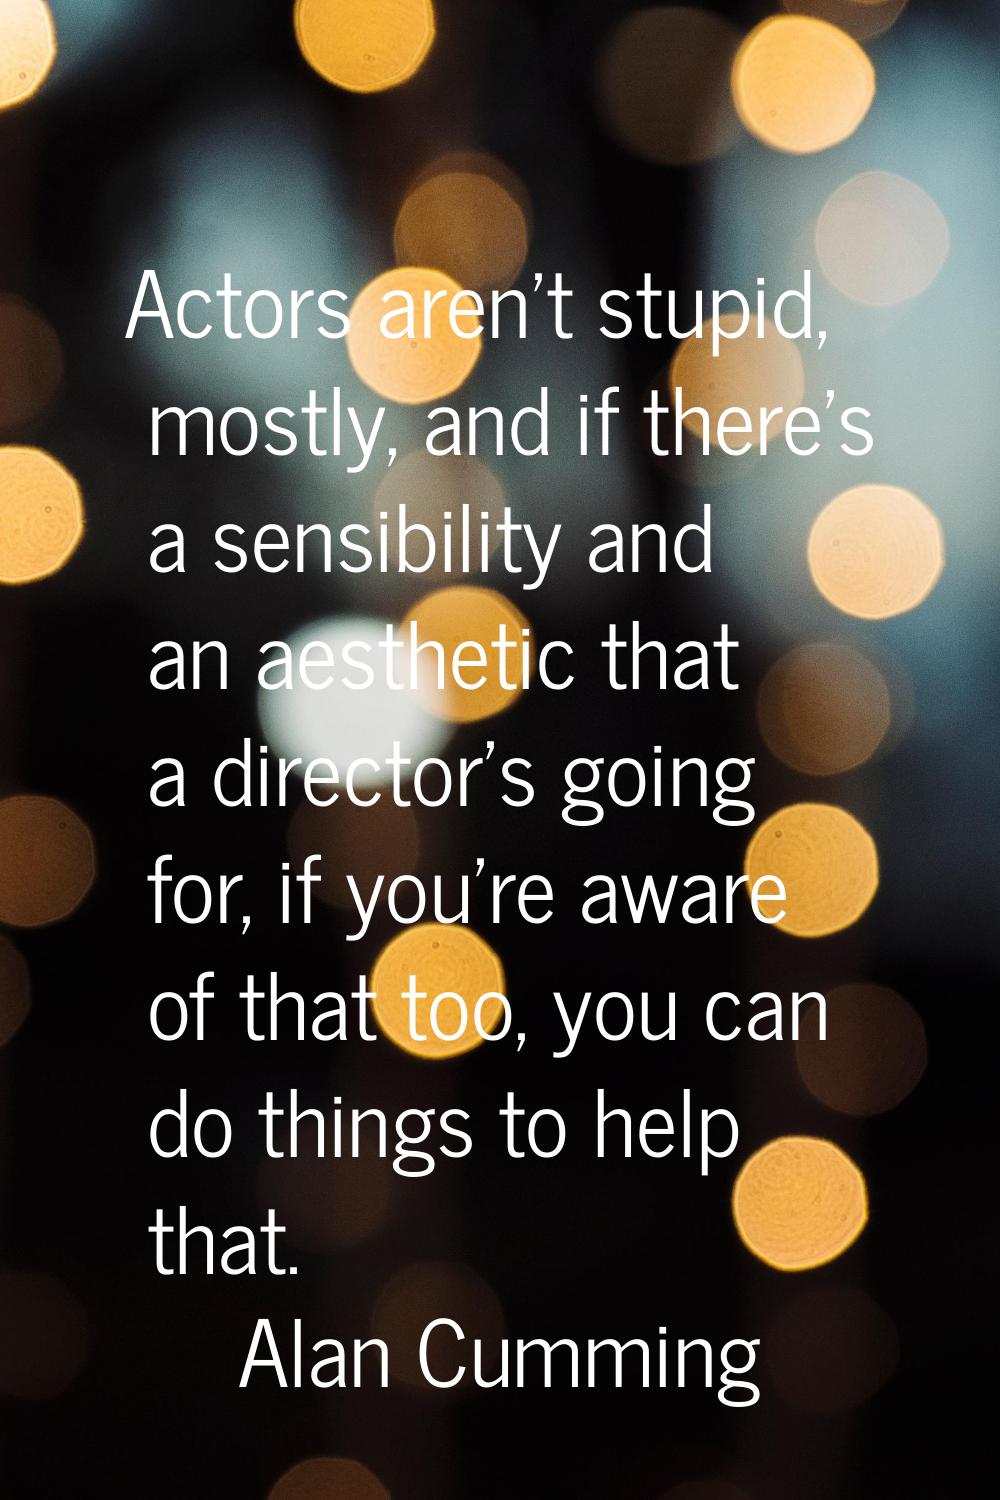 Actors aren't stupid, mostly, and if there's a sensibility and an aesthetic that a director's going